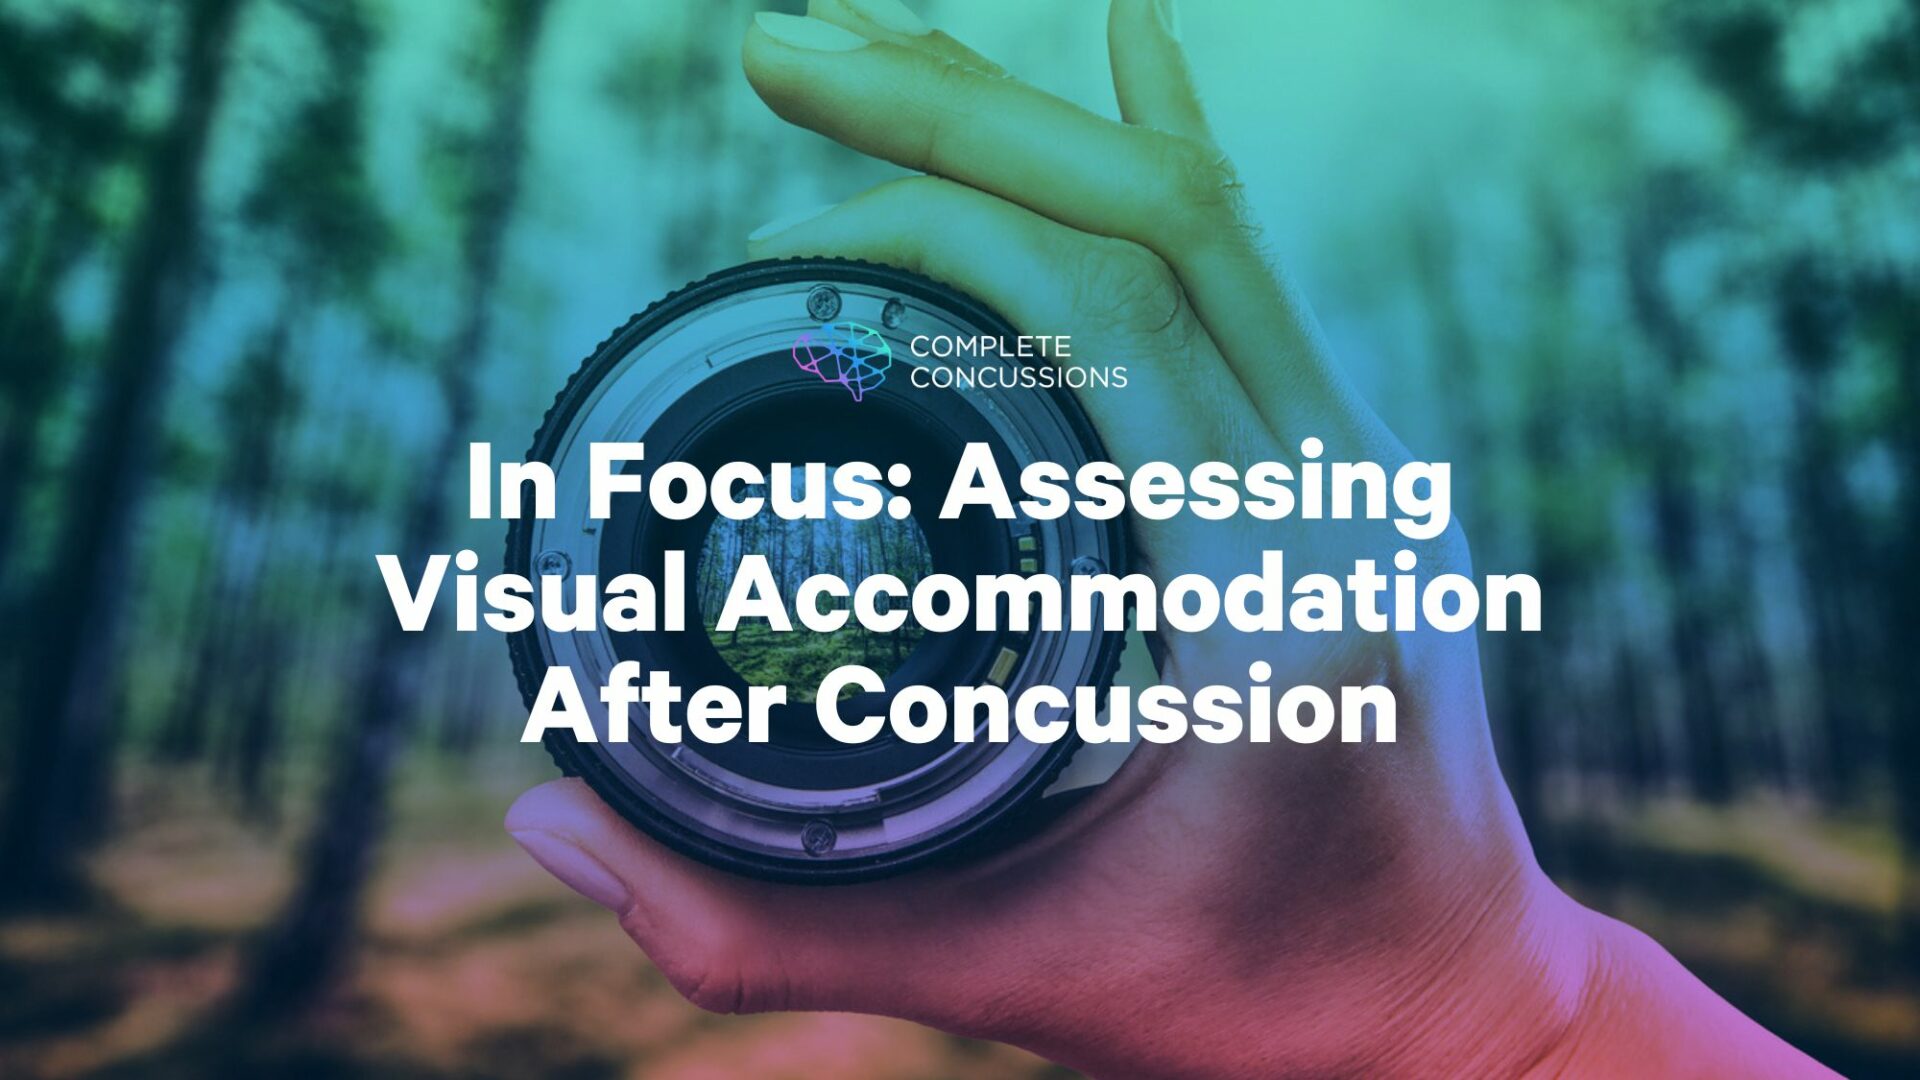 In Focus: Assessing Visual Accommodation After Concussion